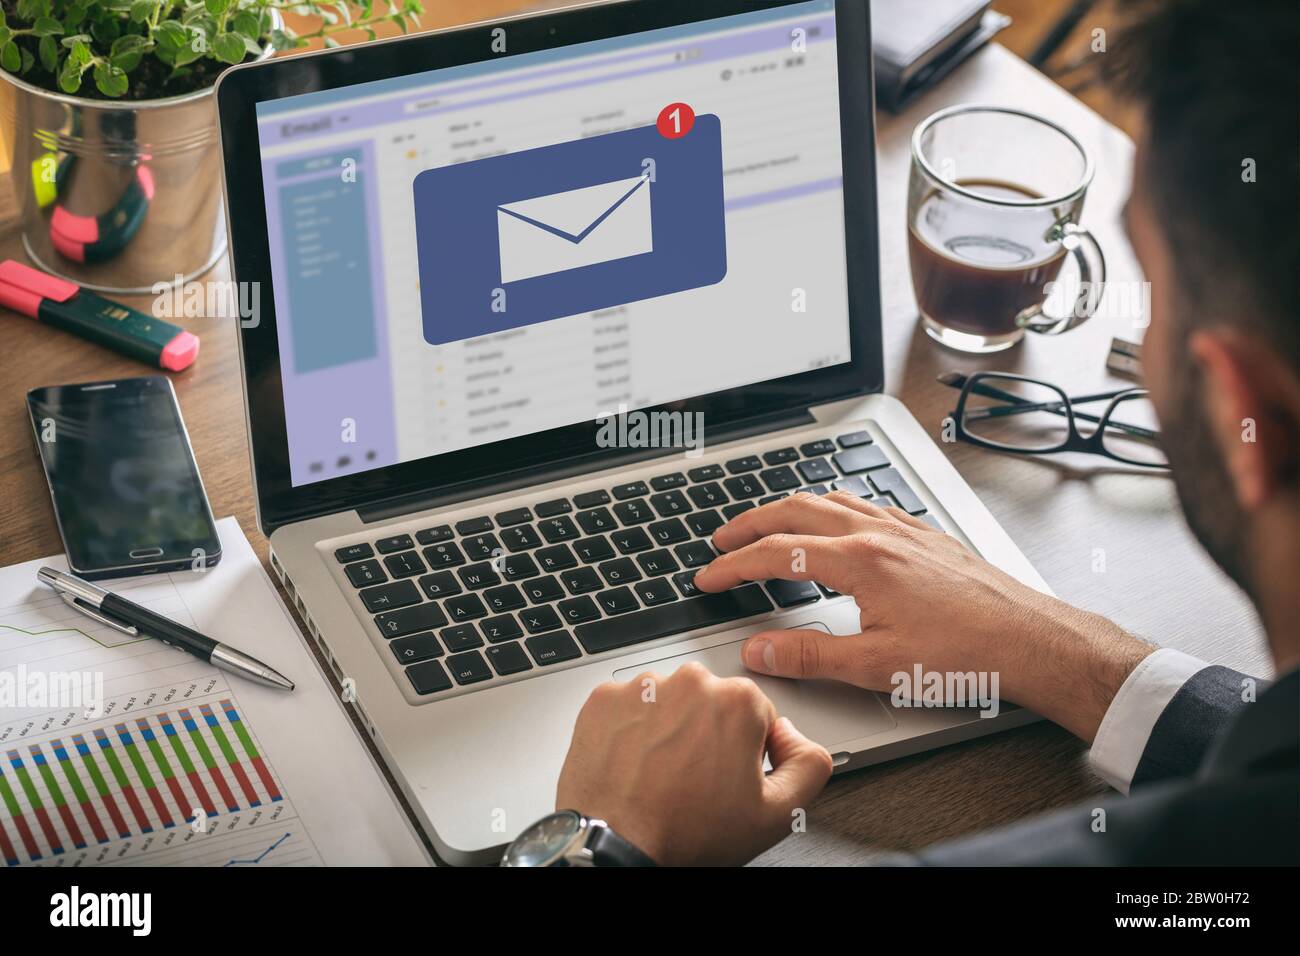 Email notification concept, man working with a computer laptop, one new inbox e mail message on the screen, business office desk background Stock Photo